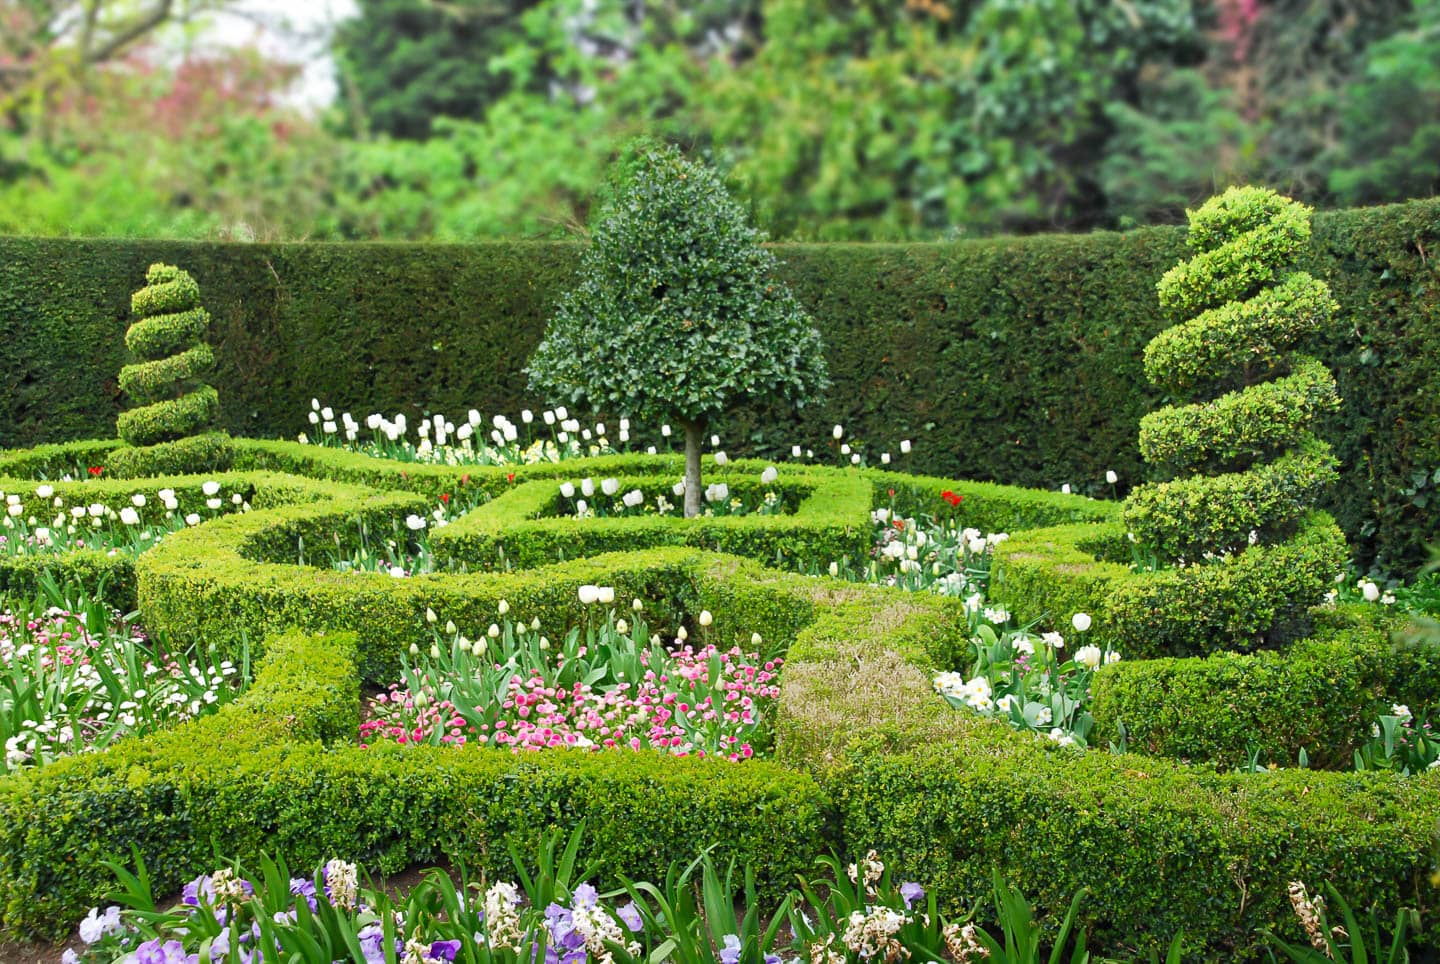 Geometric garden beds outlined with clipped hedges and topiary shrubs